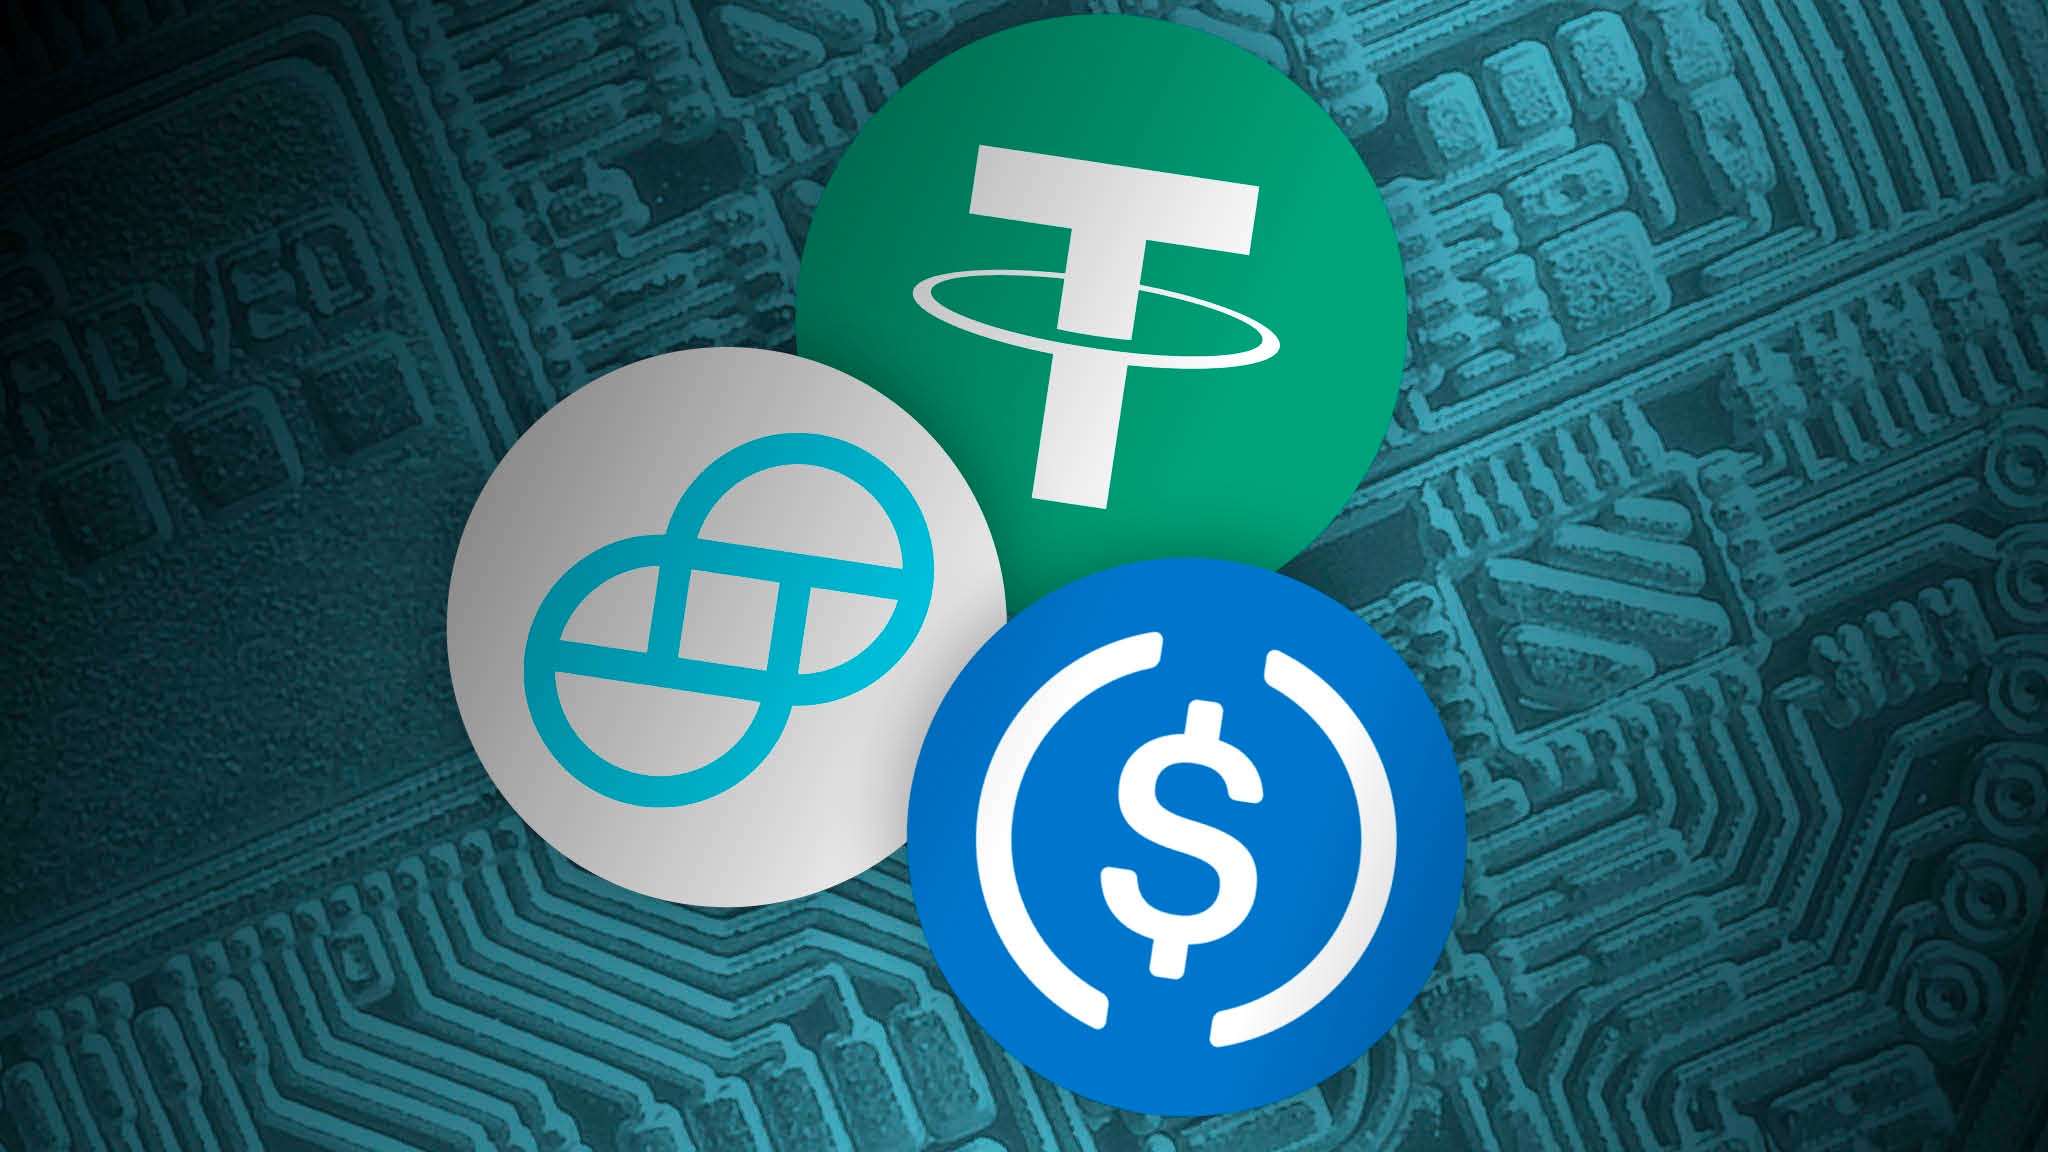 Fed stablecoins